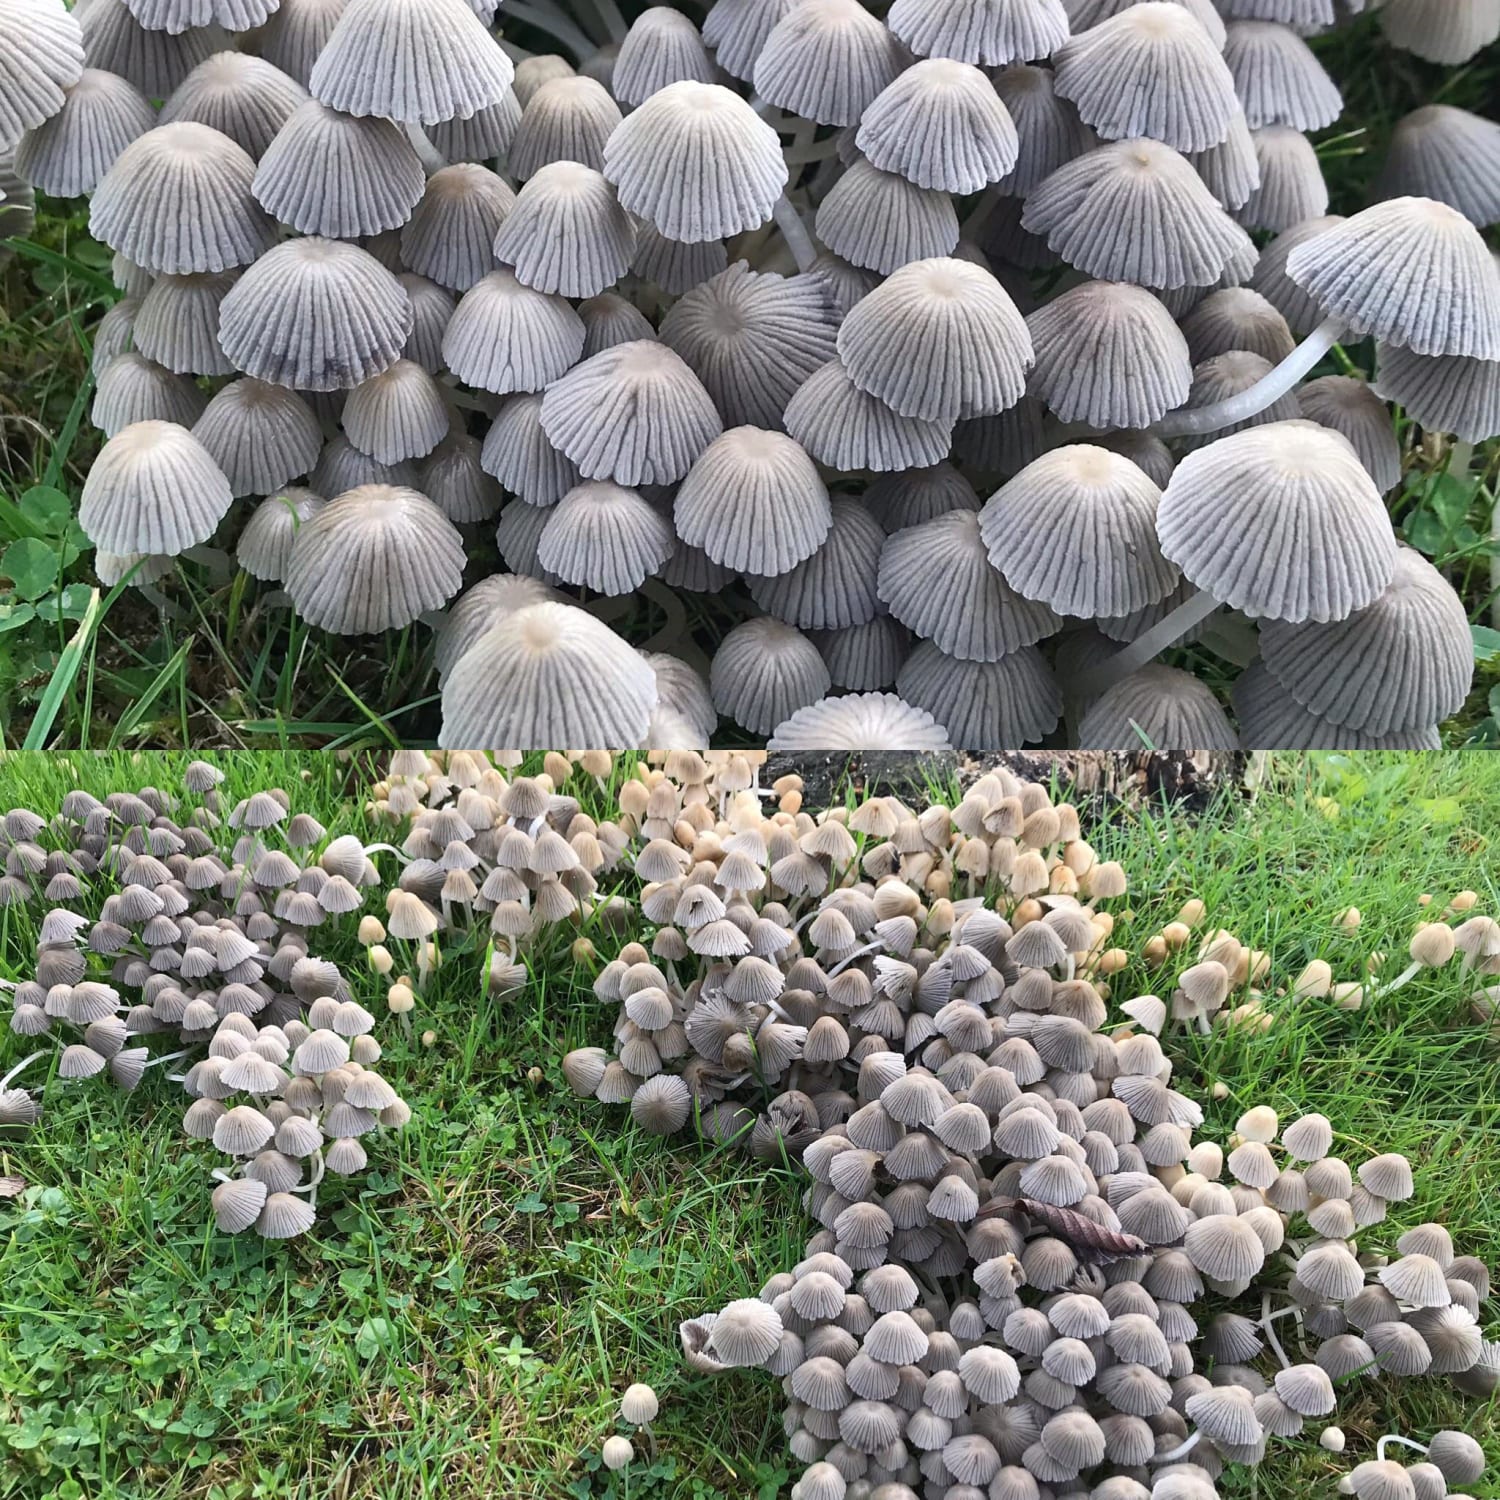 ID request please! On a long-dead stump in a lawn in the UK